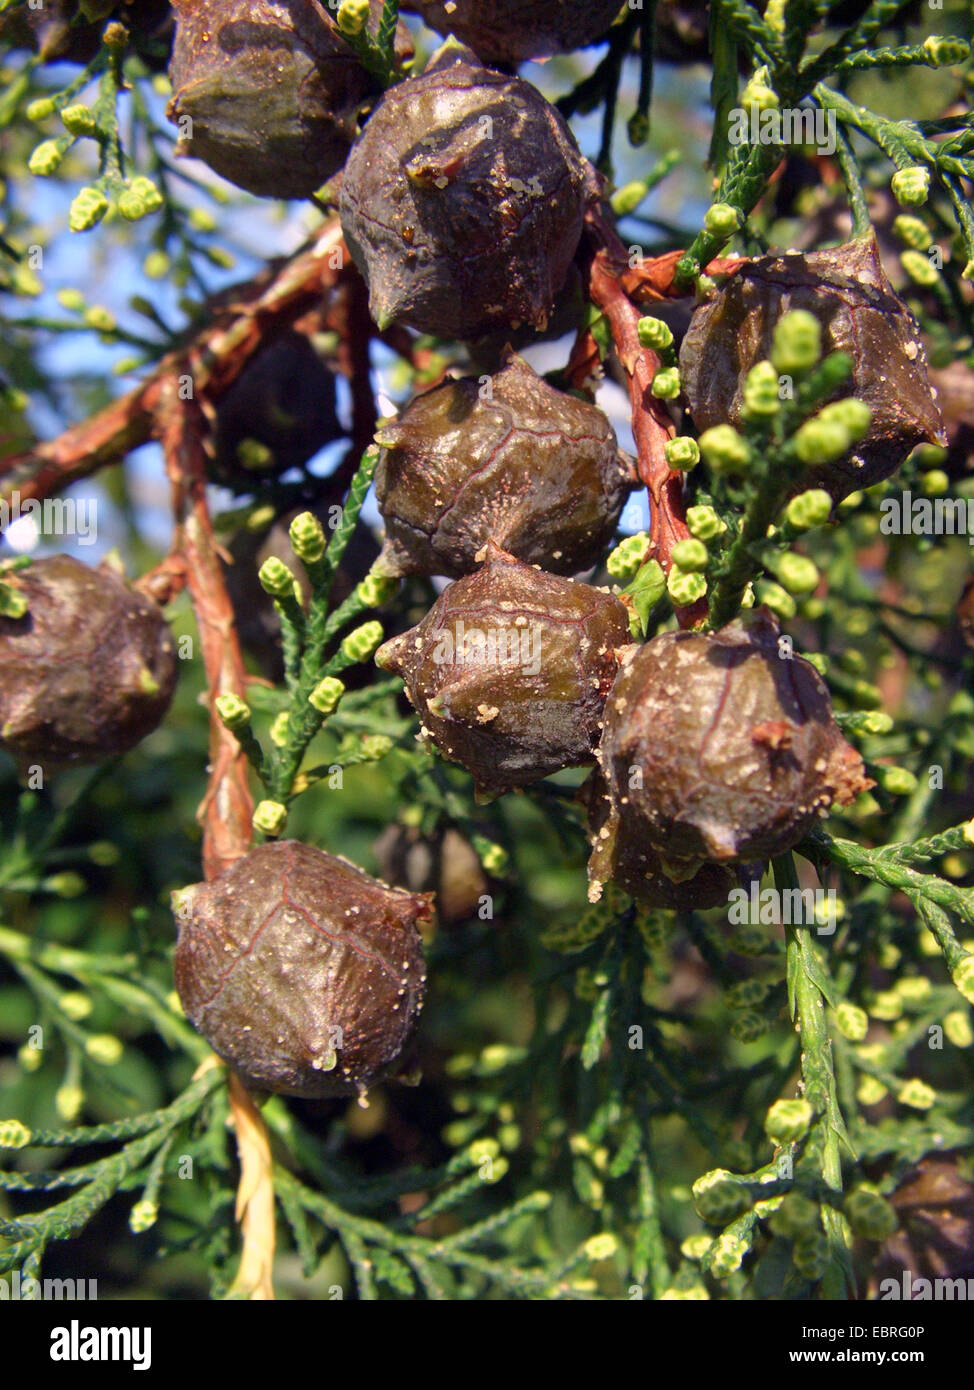 Himalayan cypress (Cupressus torulosa), branch with cones and mal buds Stock Photo